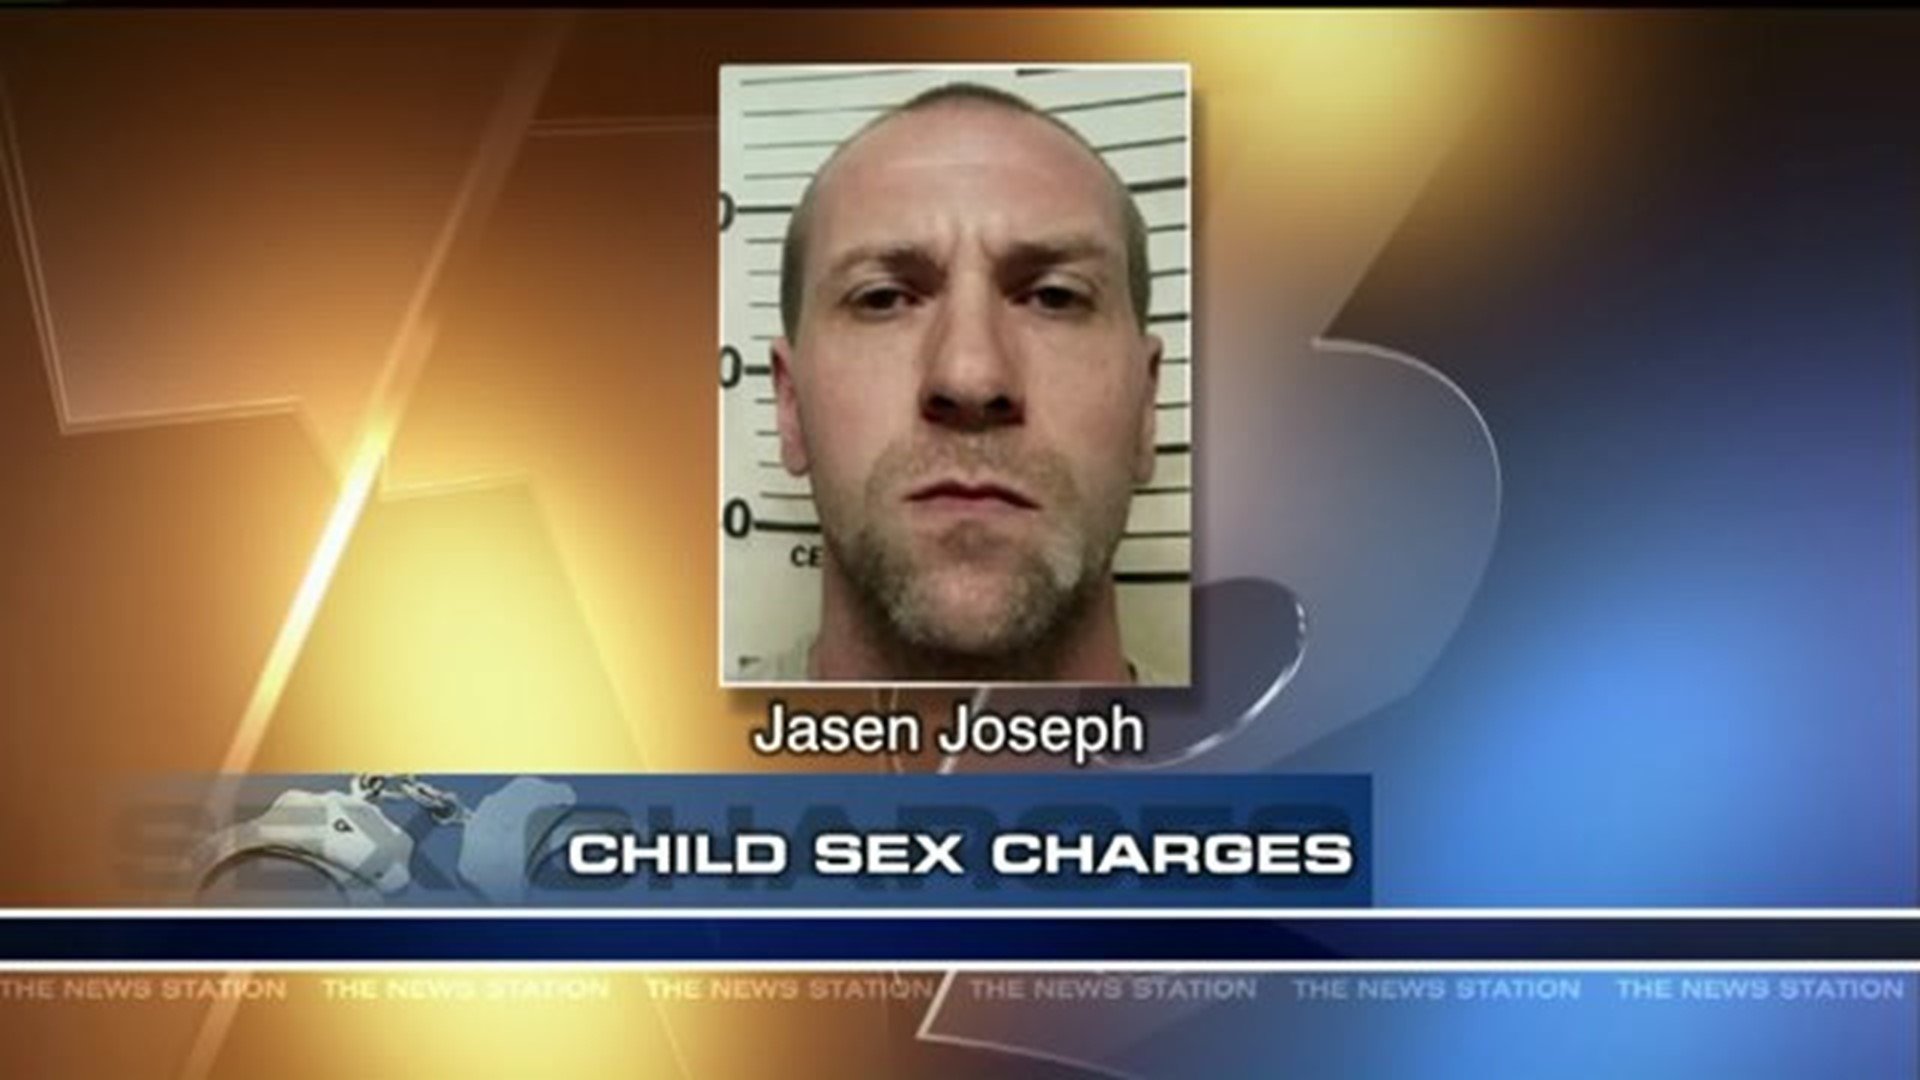 Police: Schuylkill County Man Forced Child to Watch Porn | wnep.com